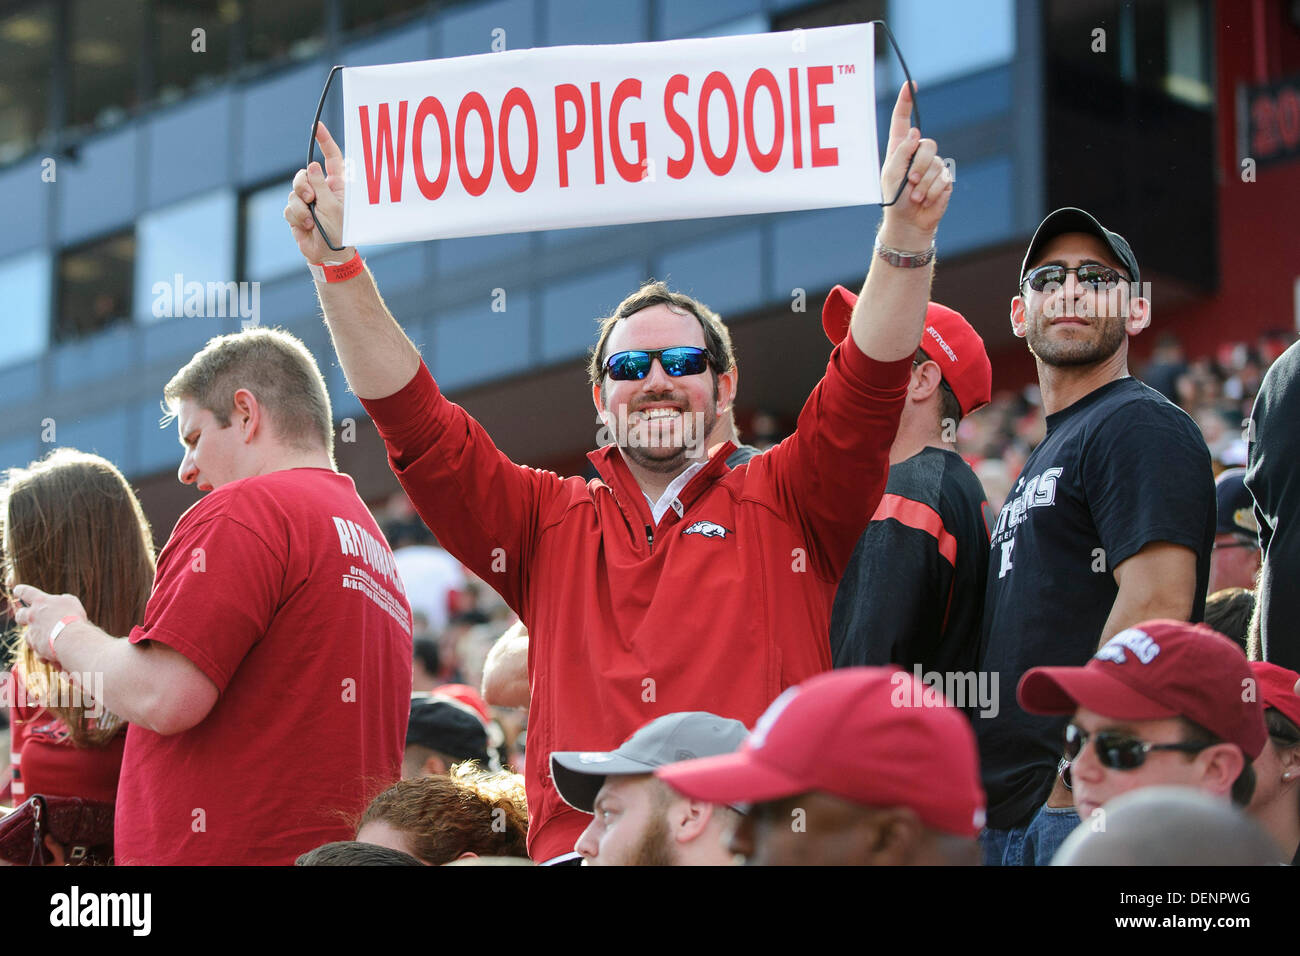 Piscataway, New Jersey, USA. 21st Sep, 2013. September 21, 2013: An Arkansas Razorbacks super fan holds up a wooo pig sooie sign during the game between Arkansas Razorbacks and Rutgers Scarlet Knights at Highpoint Solutions Stadium in Piscataway, NJ. Rutgers Scarlet Knights defeated The Arkansas Razorbacks 28-24. © csm/Alamy Live News Stock Photo